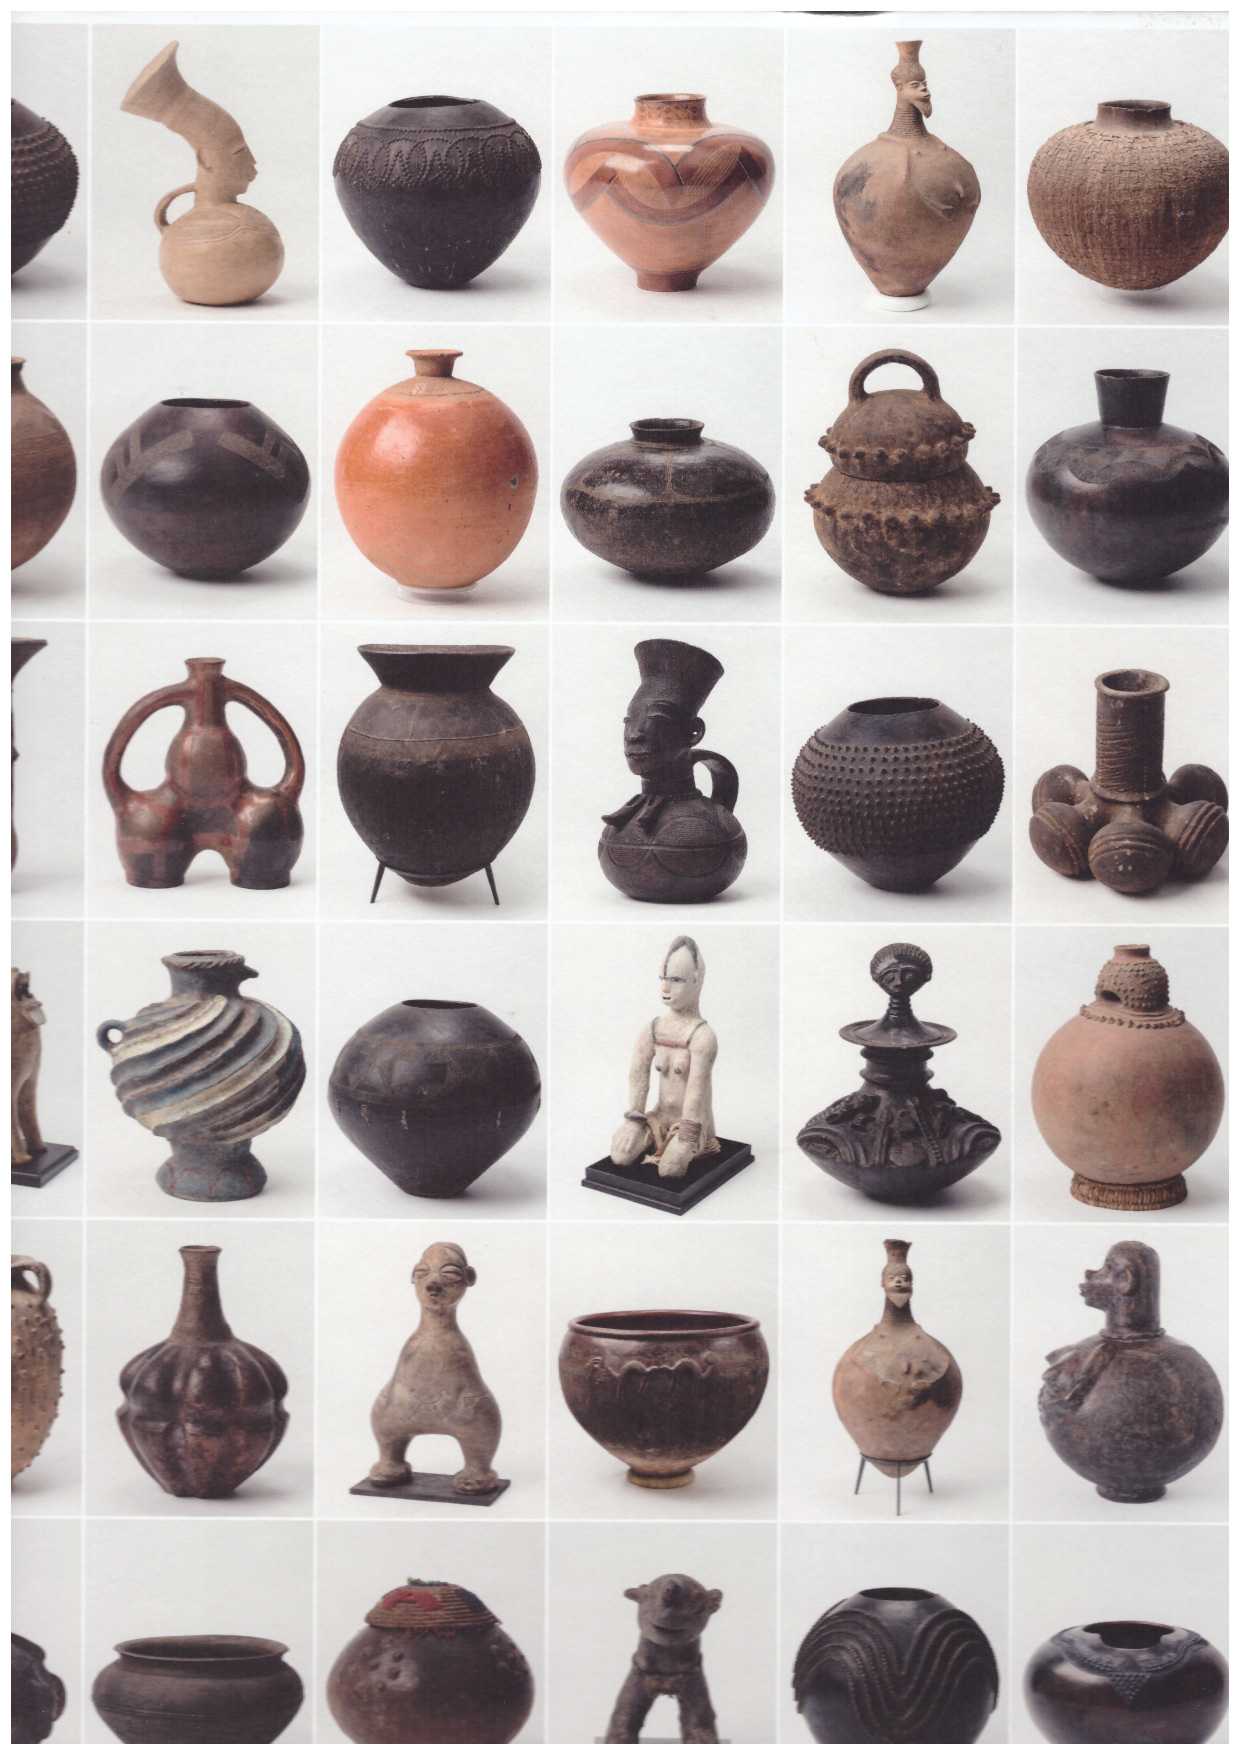 NOLLERT, Angelika (ed.) - African Ceramics. A Different Perspective